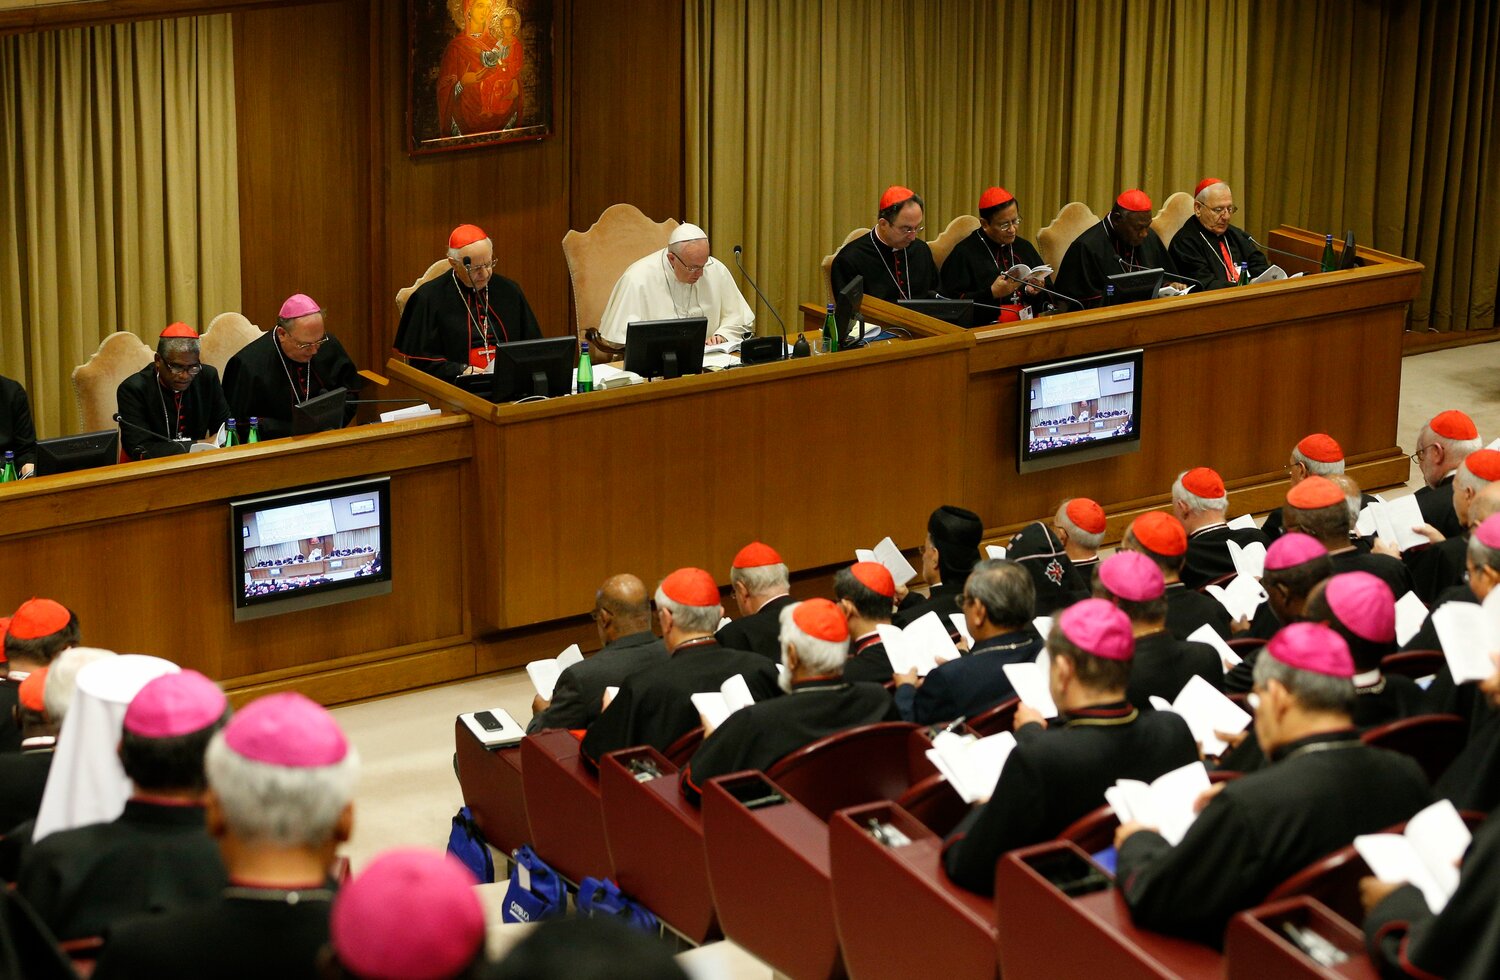 Pope Francis attends a session of the Synod of Bishops on young people in the Vatican synod hall in this file photo from 2018. The October assembly of the "synod on synodality" has been moved to the larger Vatican audience hall where members will sit at round tables, rather than in rows.